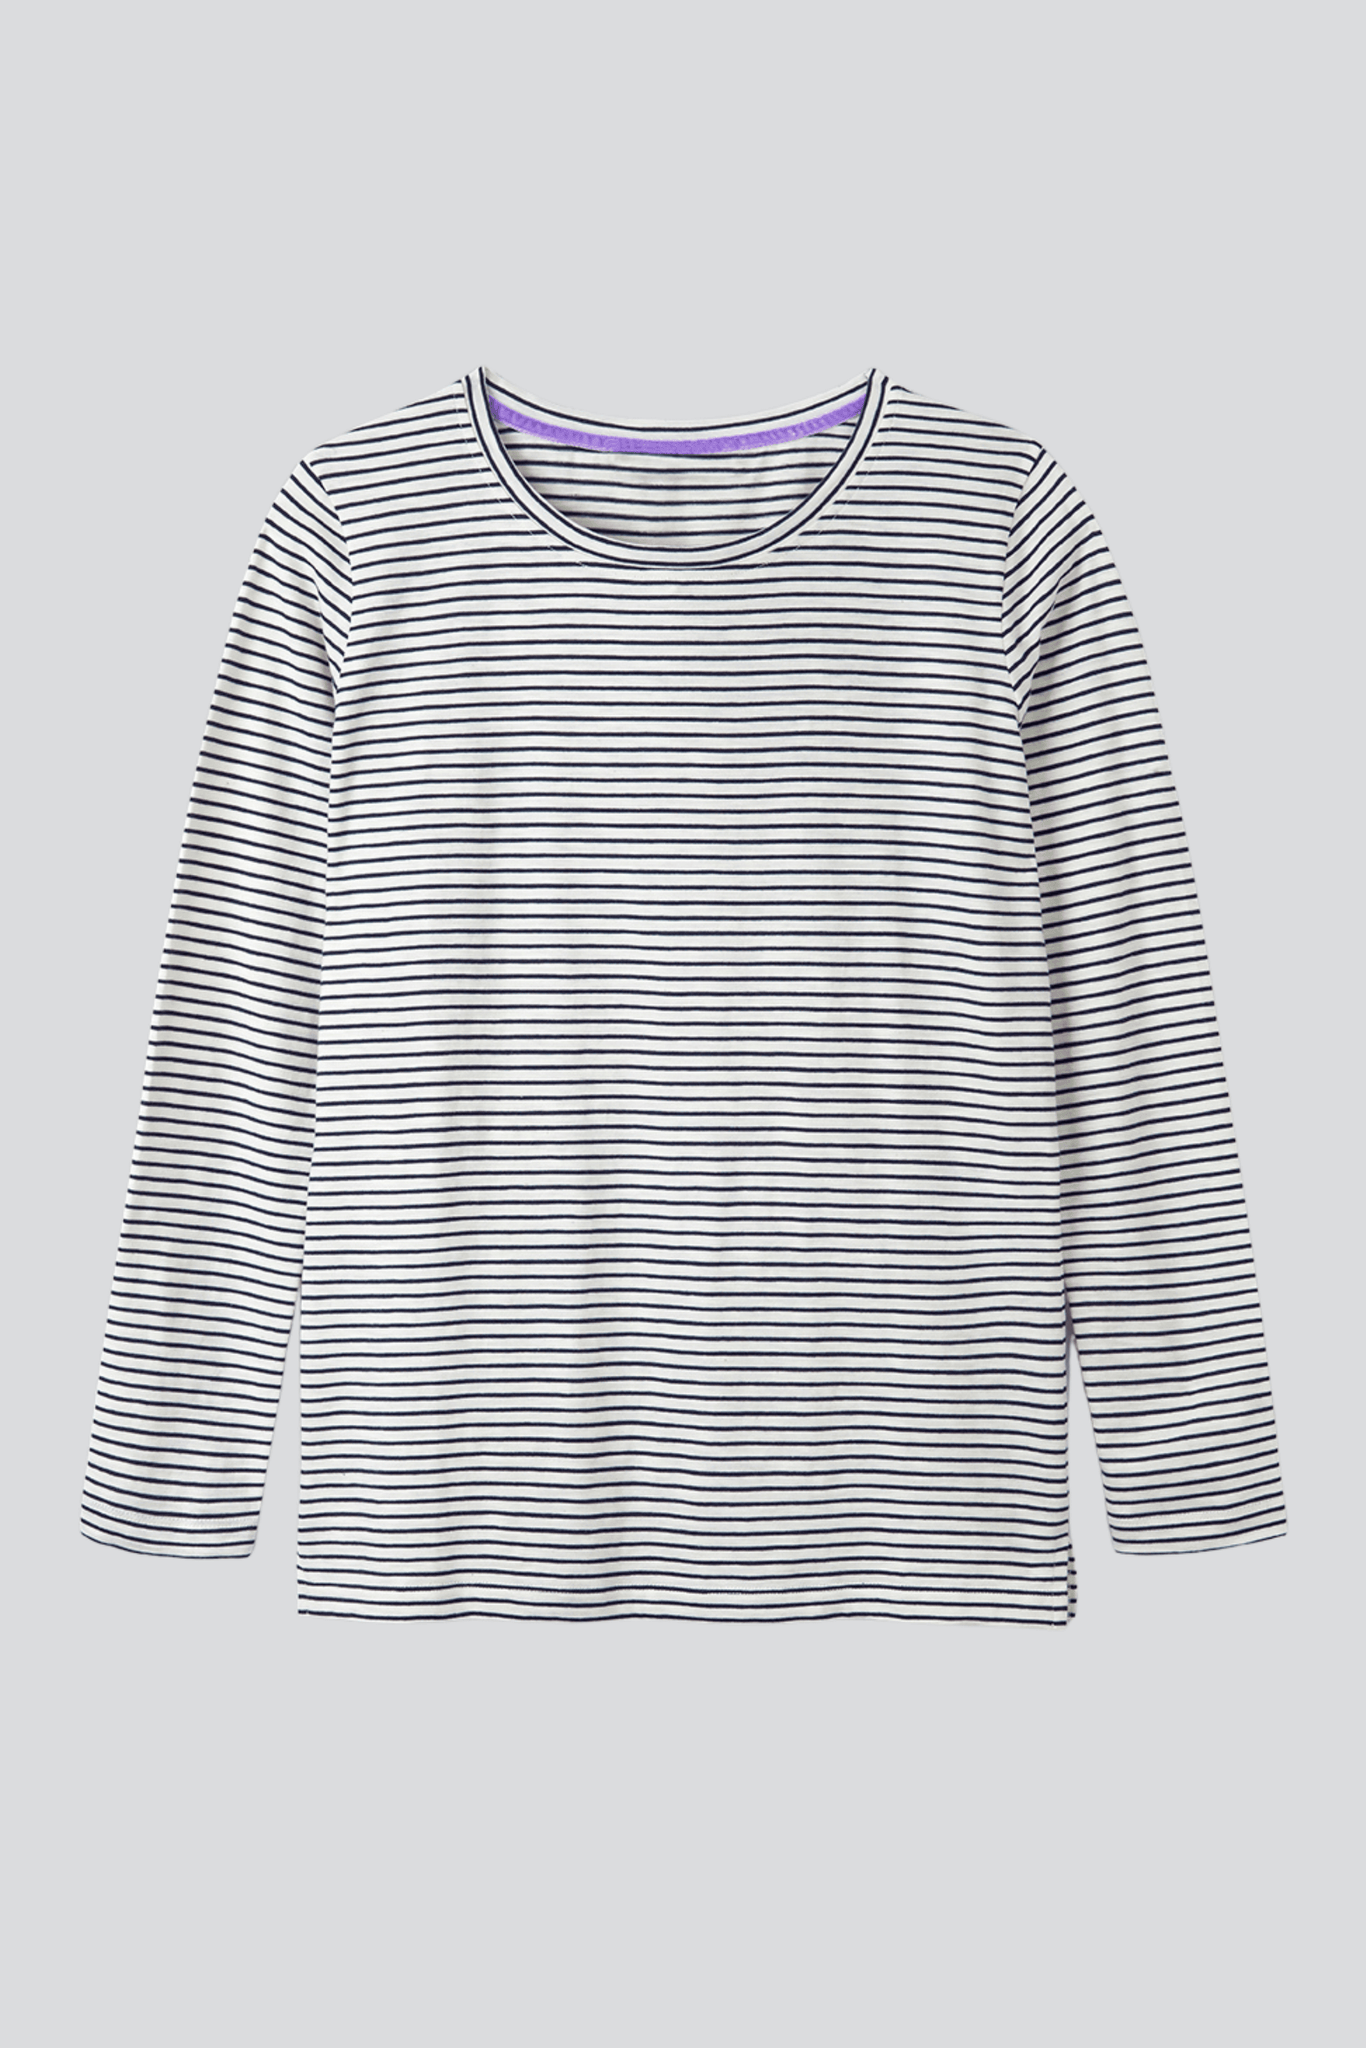 Women's Striped Crew Neck T-shirt in Navy and Ecru - Quality Long Sleeve T-shirt - Comfortable Long Sleeve Stripe T-Shirt Lavender Hill Clothing